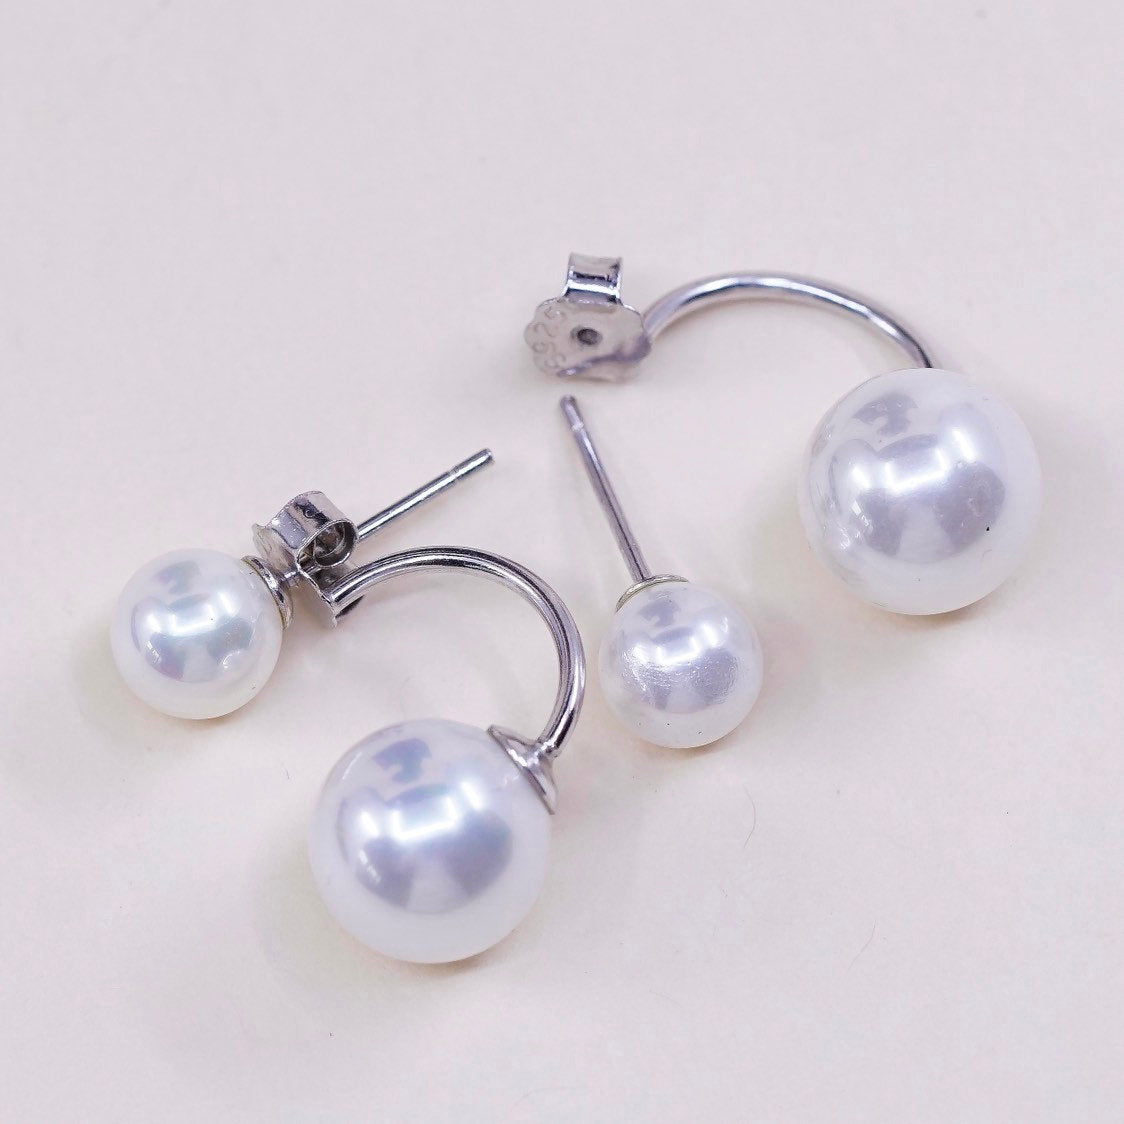 vtg Sterling silver handmade earrings, 925 silver with pearl drop, stamped 925